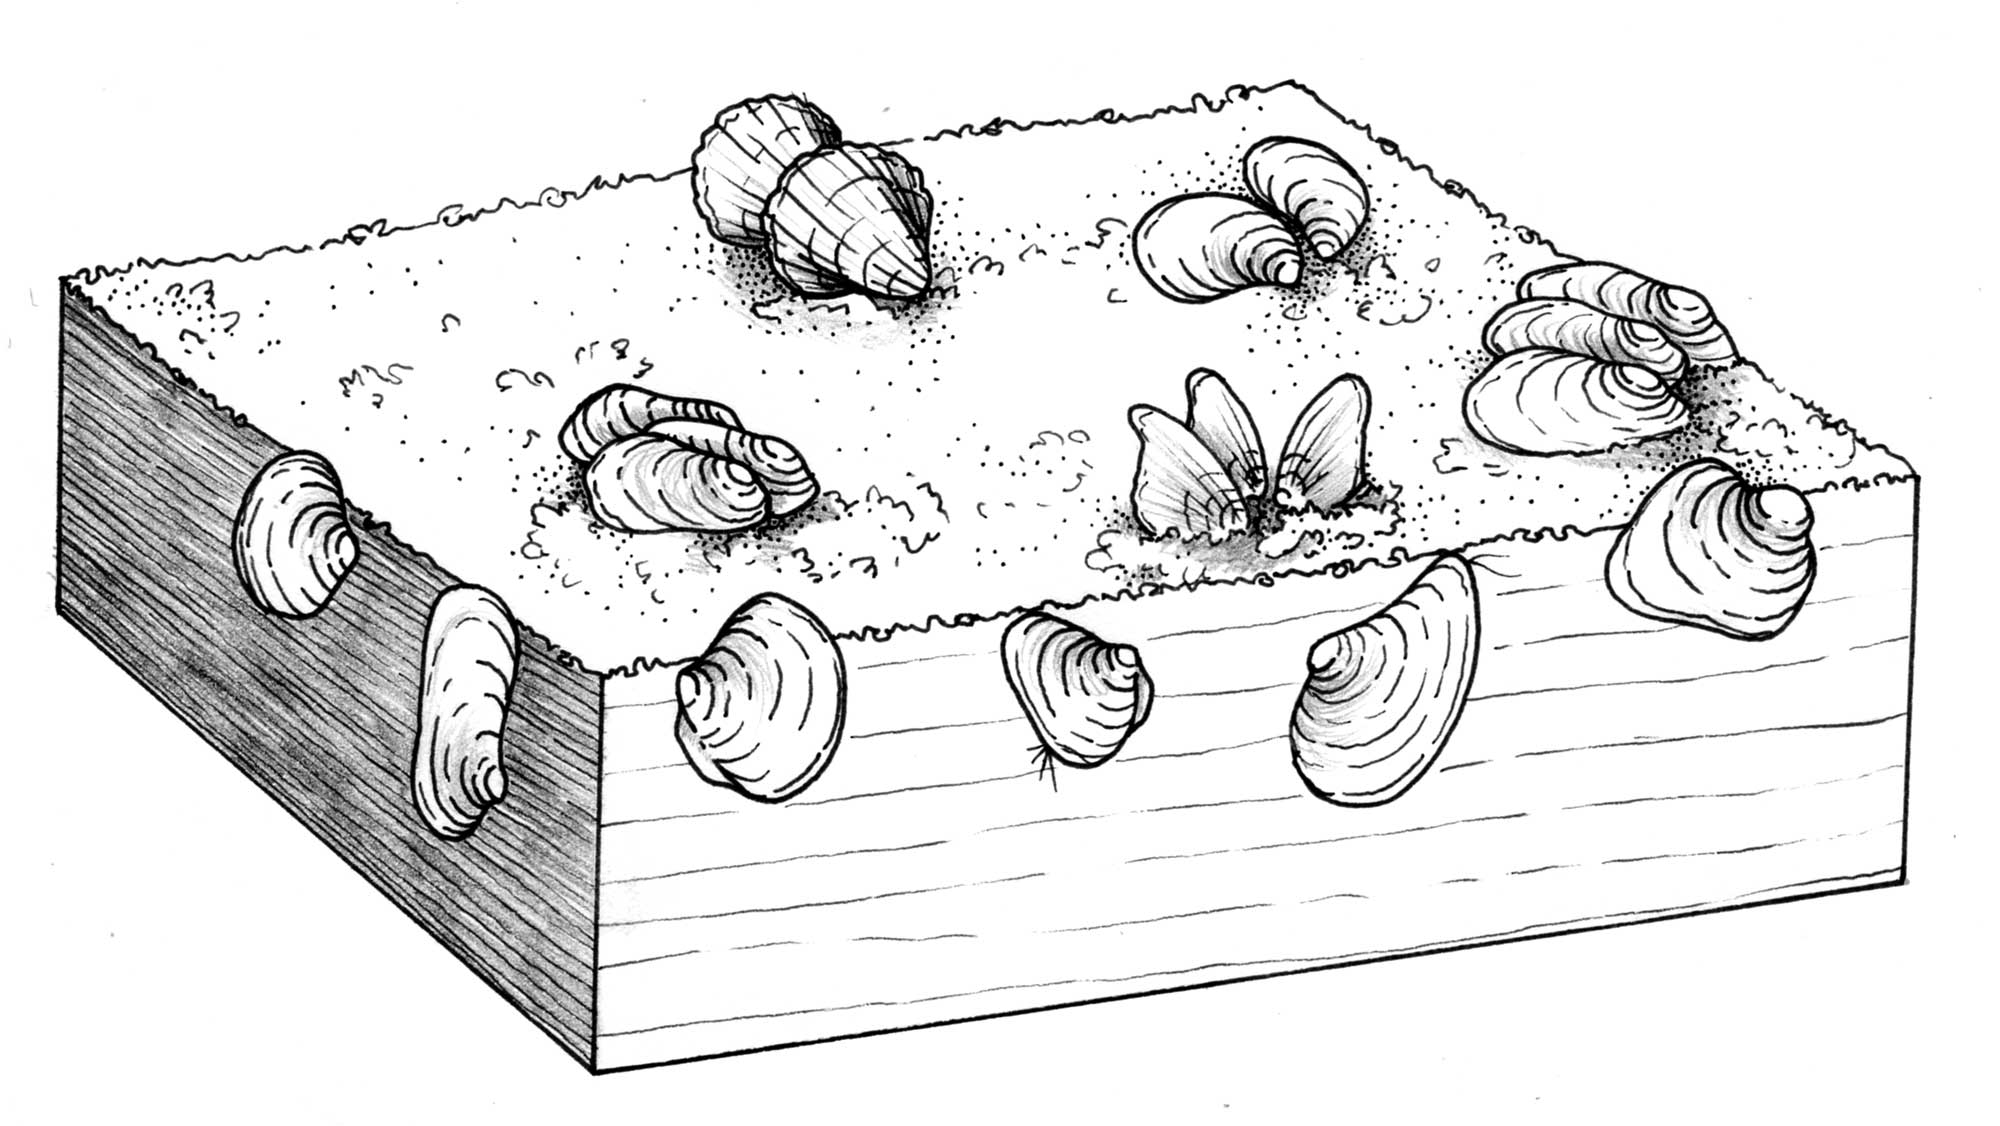 Illustration of the life habits of Ordovician bivalves.